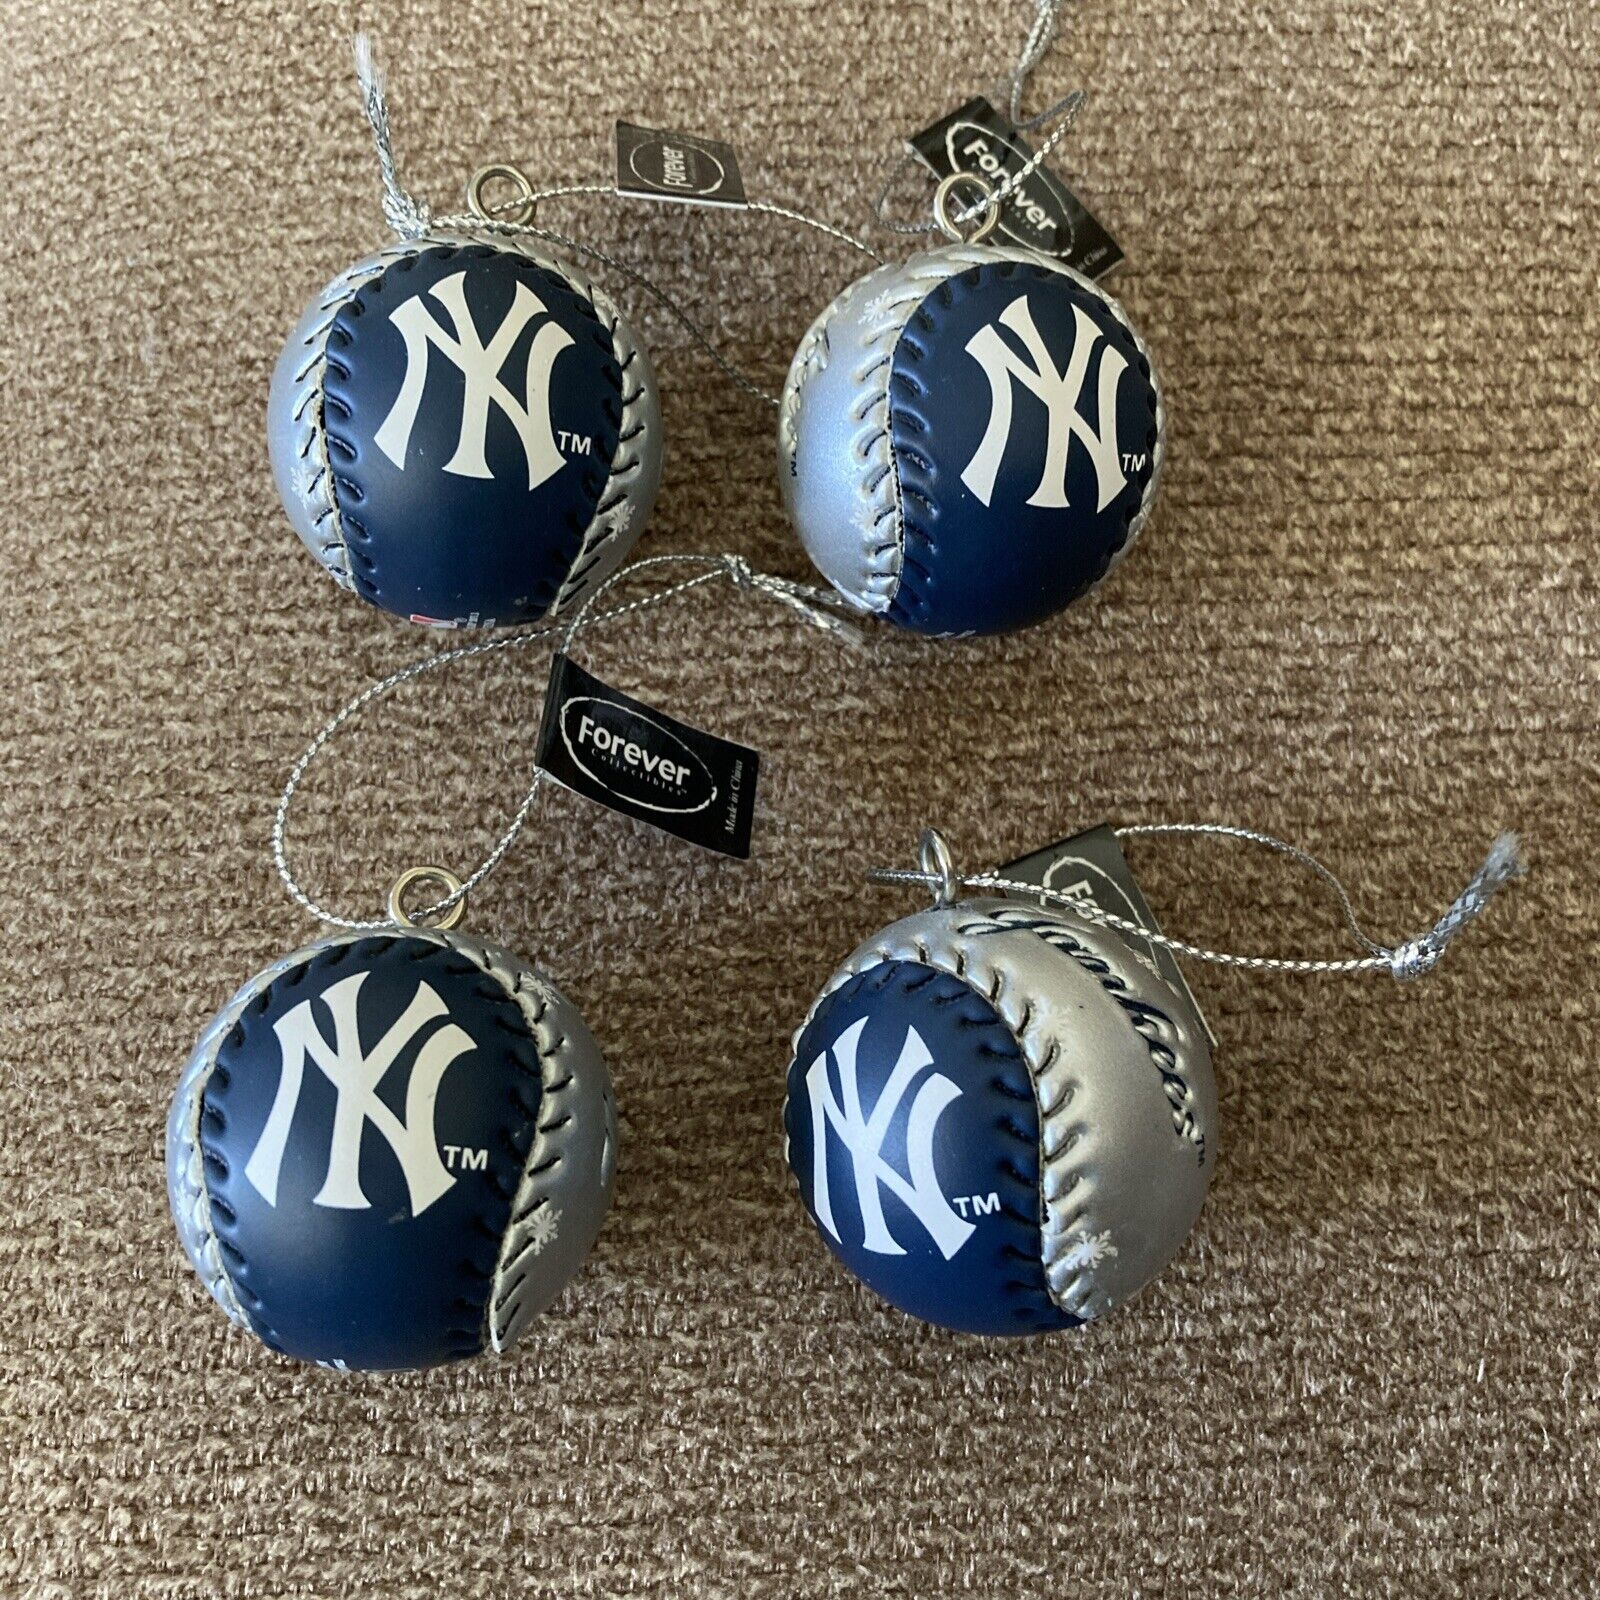 2011 Forever Collectibles Team Beans New York Yankees Mini Baseball Ornaments 4